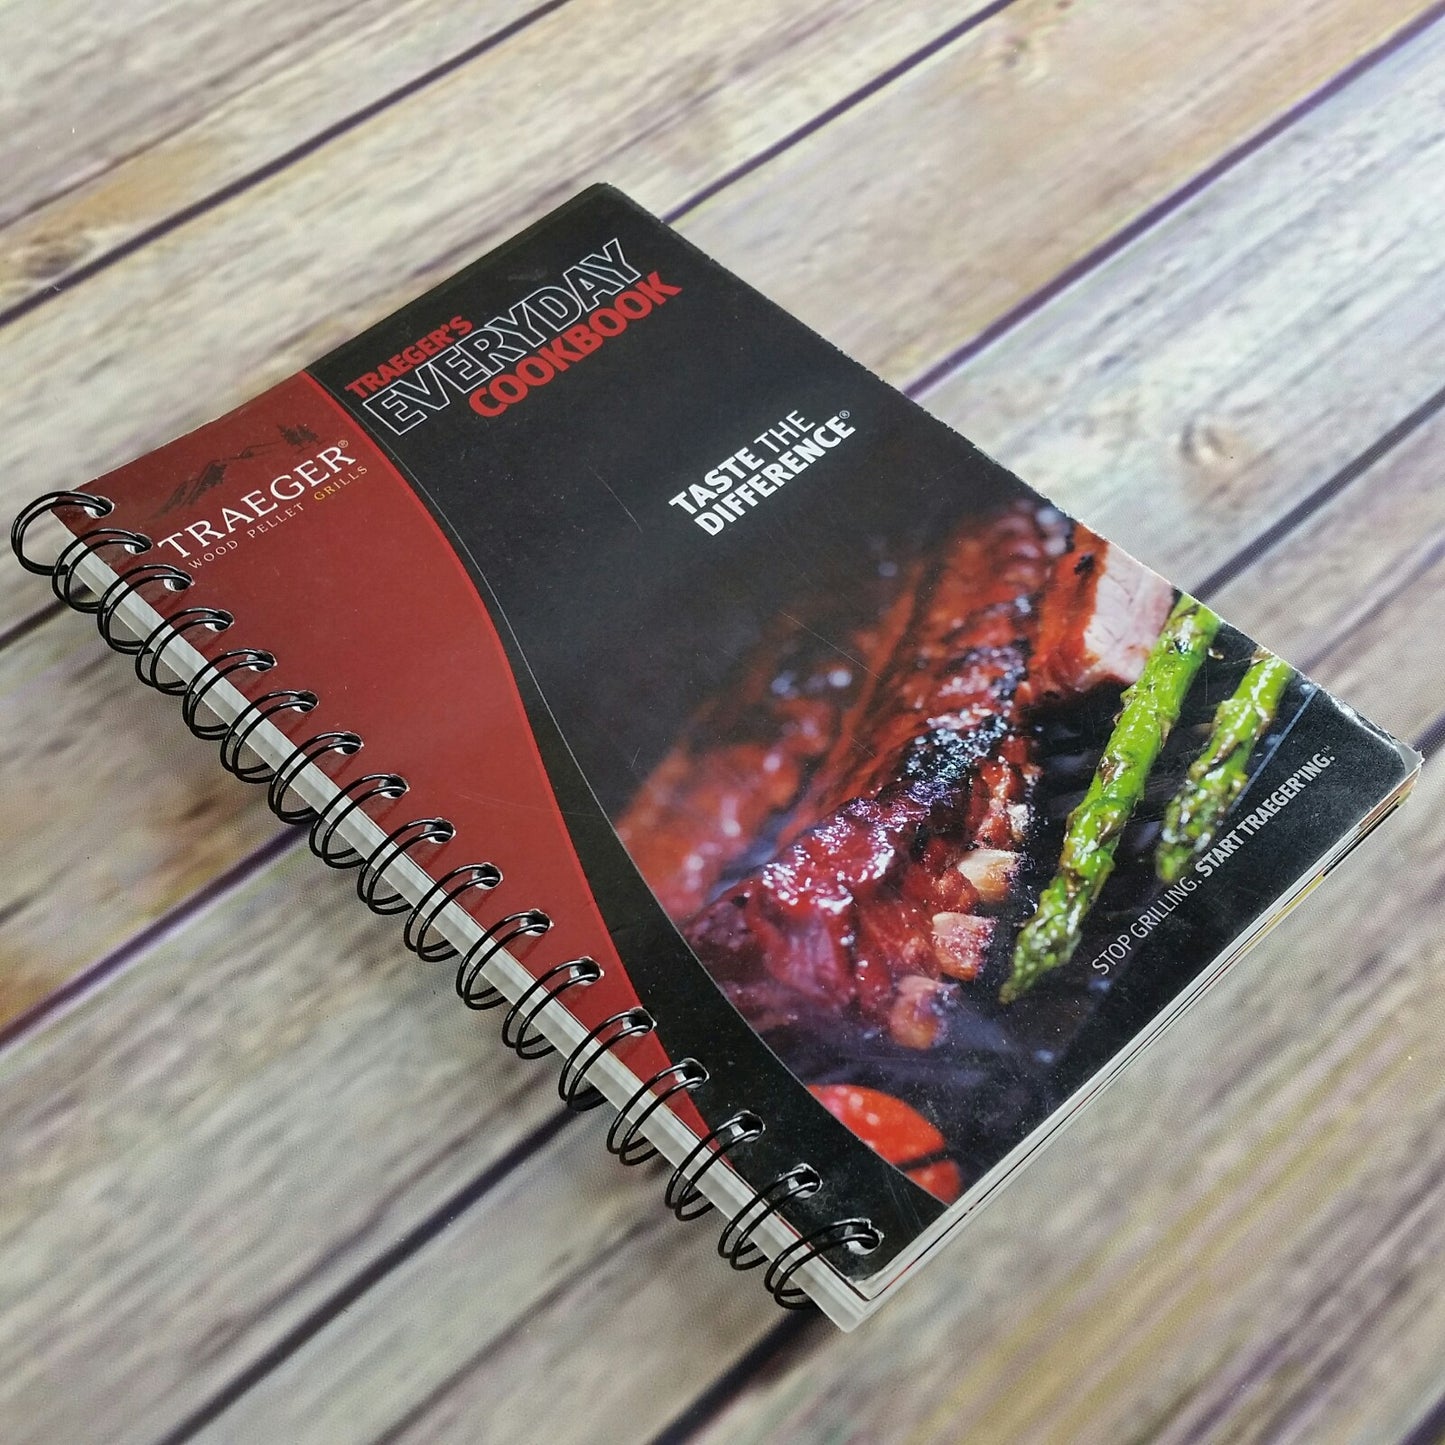 Traeger's Every Day Cookbook Wood Pellet Grill BBQ Barbecue Recipe Beef Pork 2011 Spiral Bound - At Grandma's Table